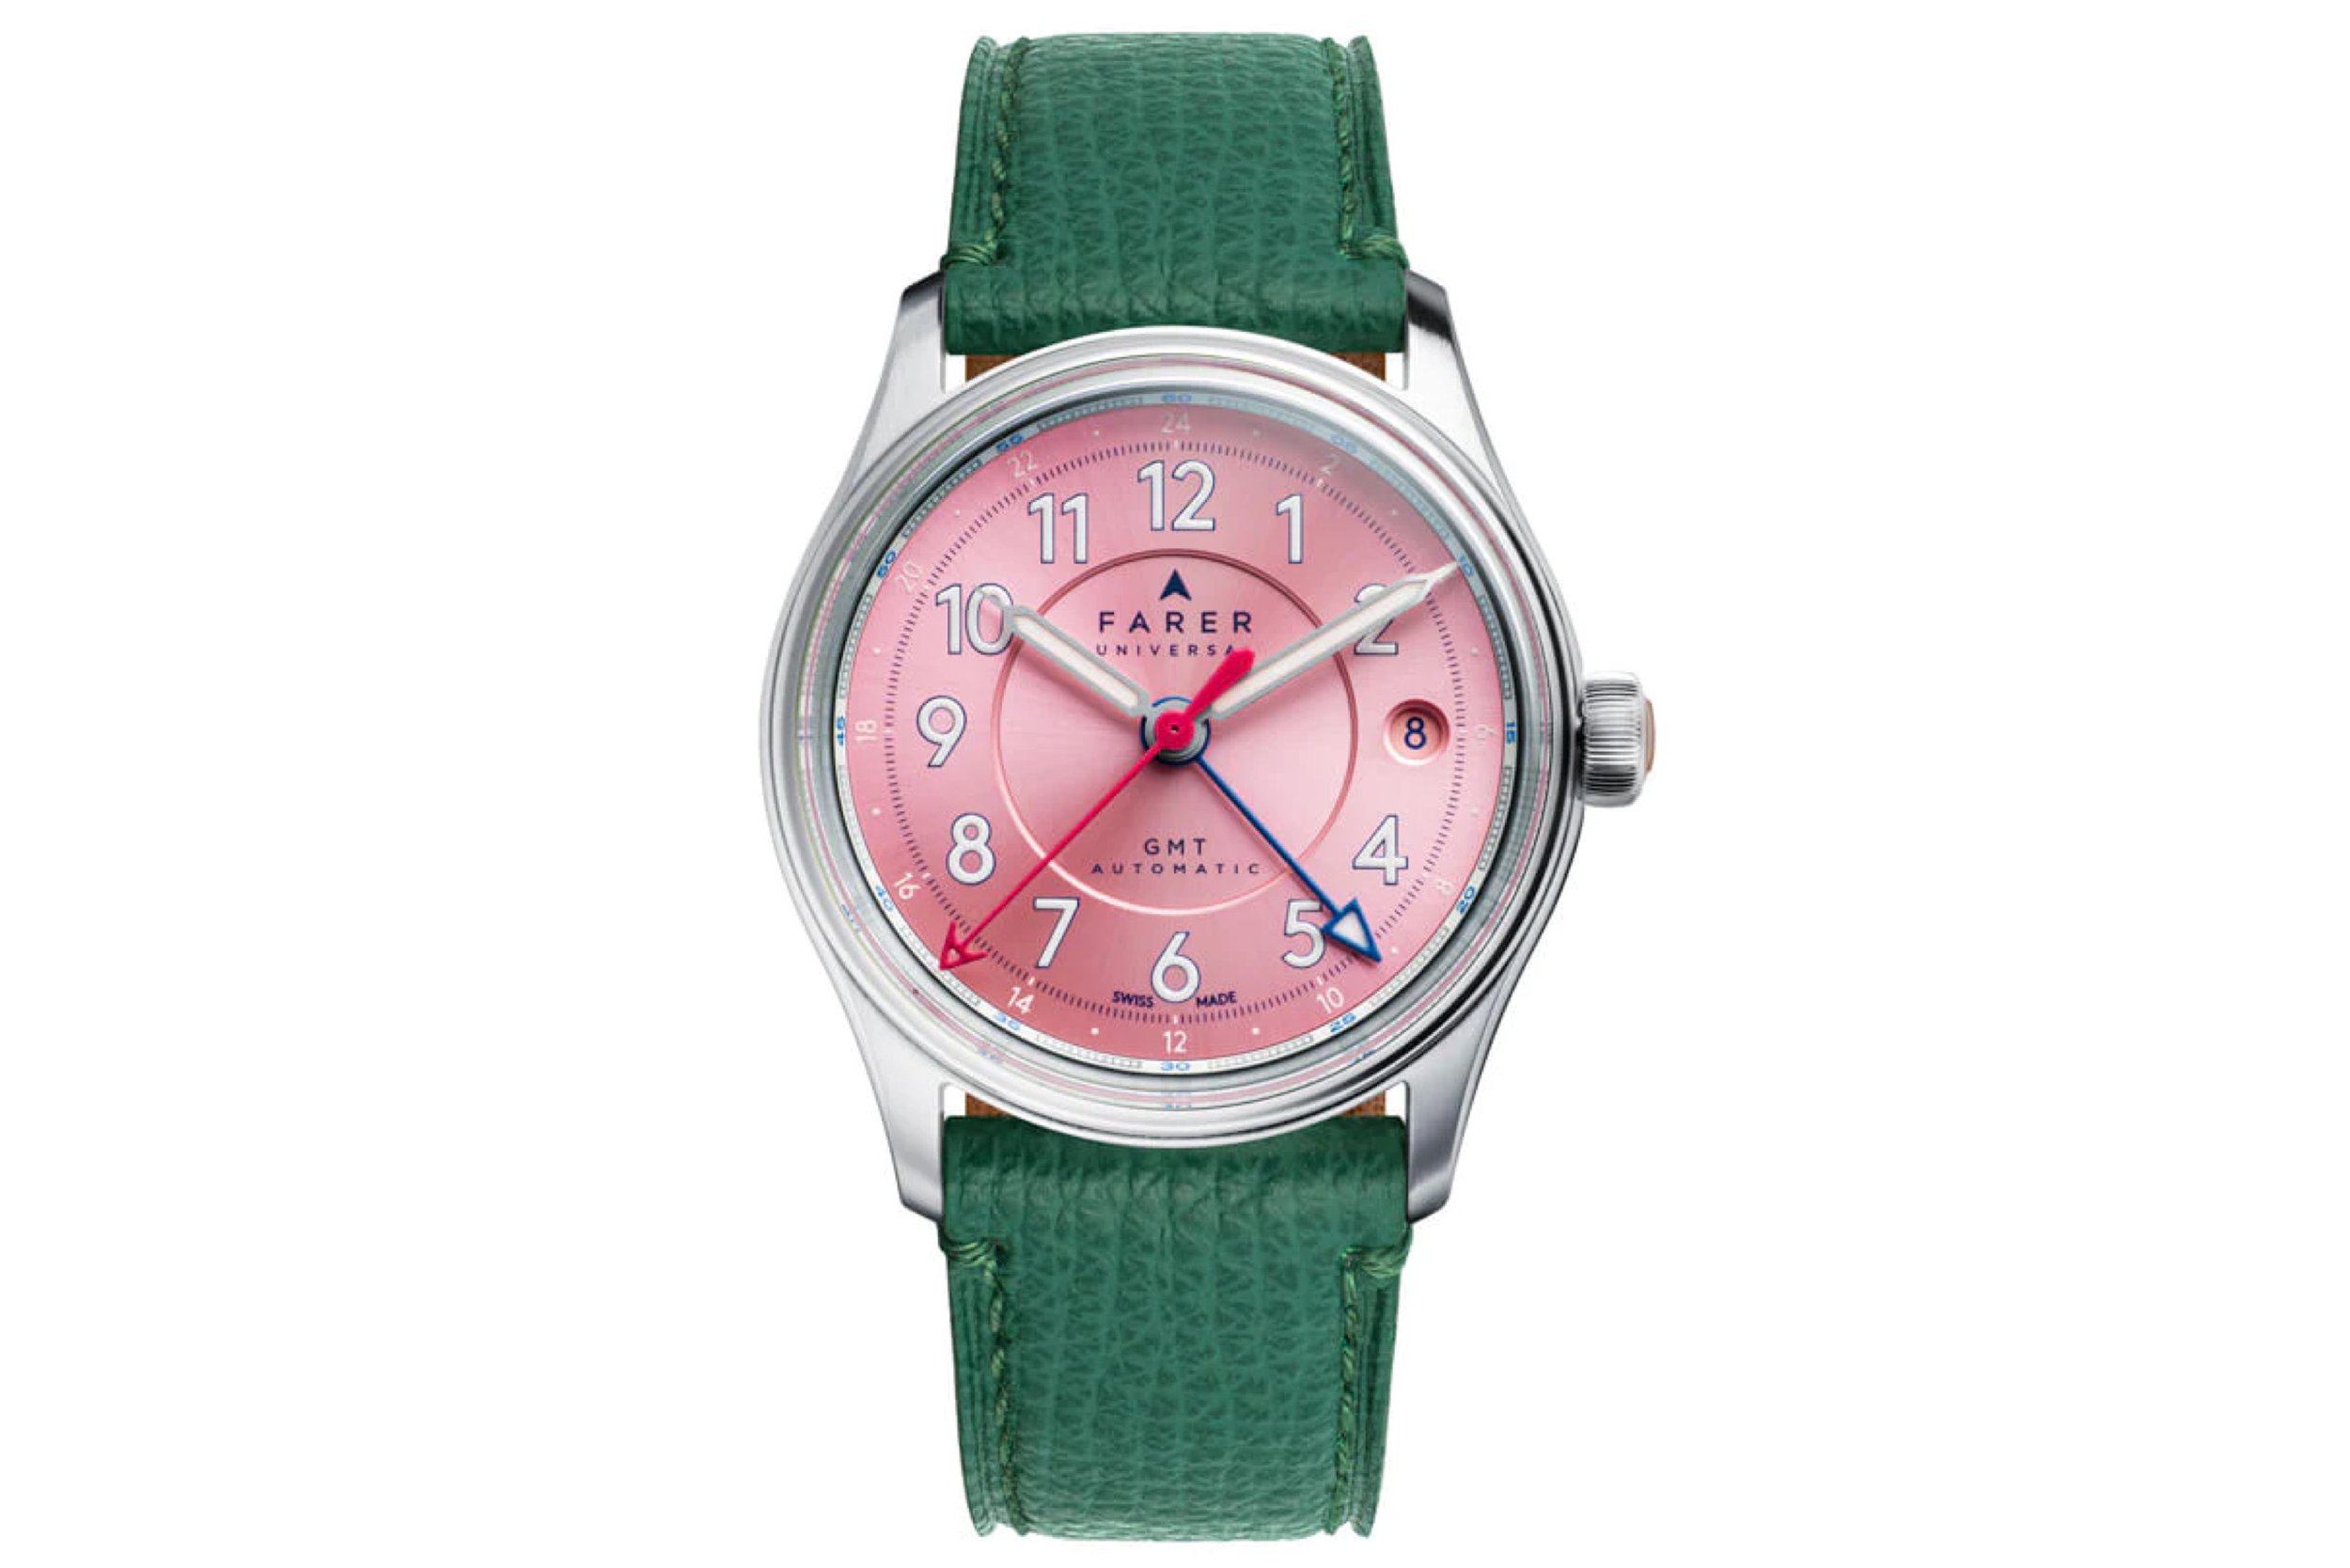 Lust List: 10 pink watches that deserve a spot in your collection